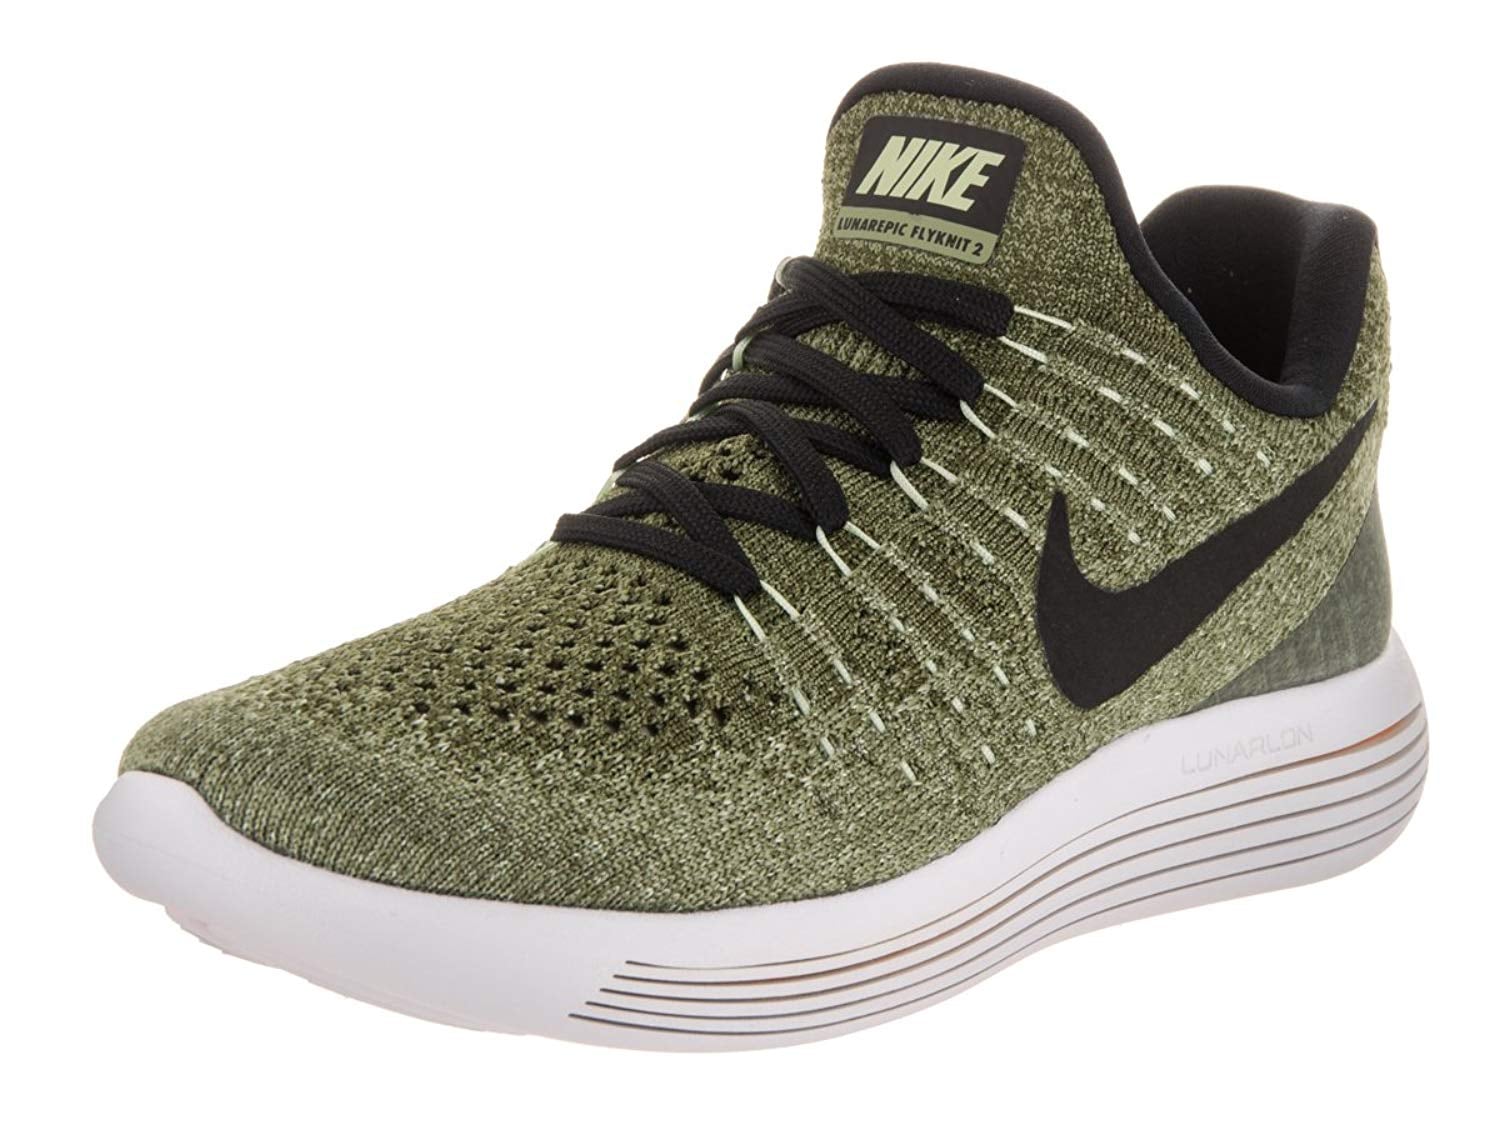 lunarepic low flyknit running shoes